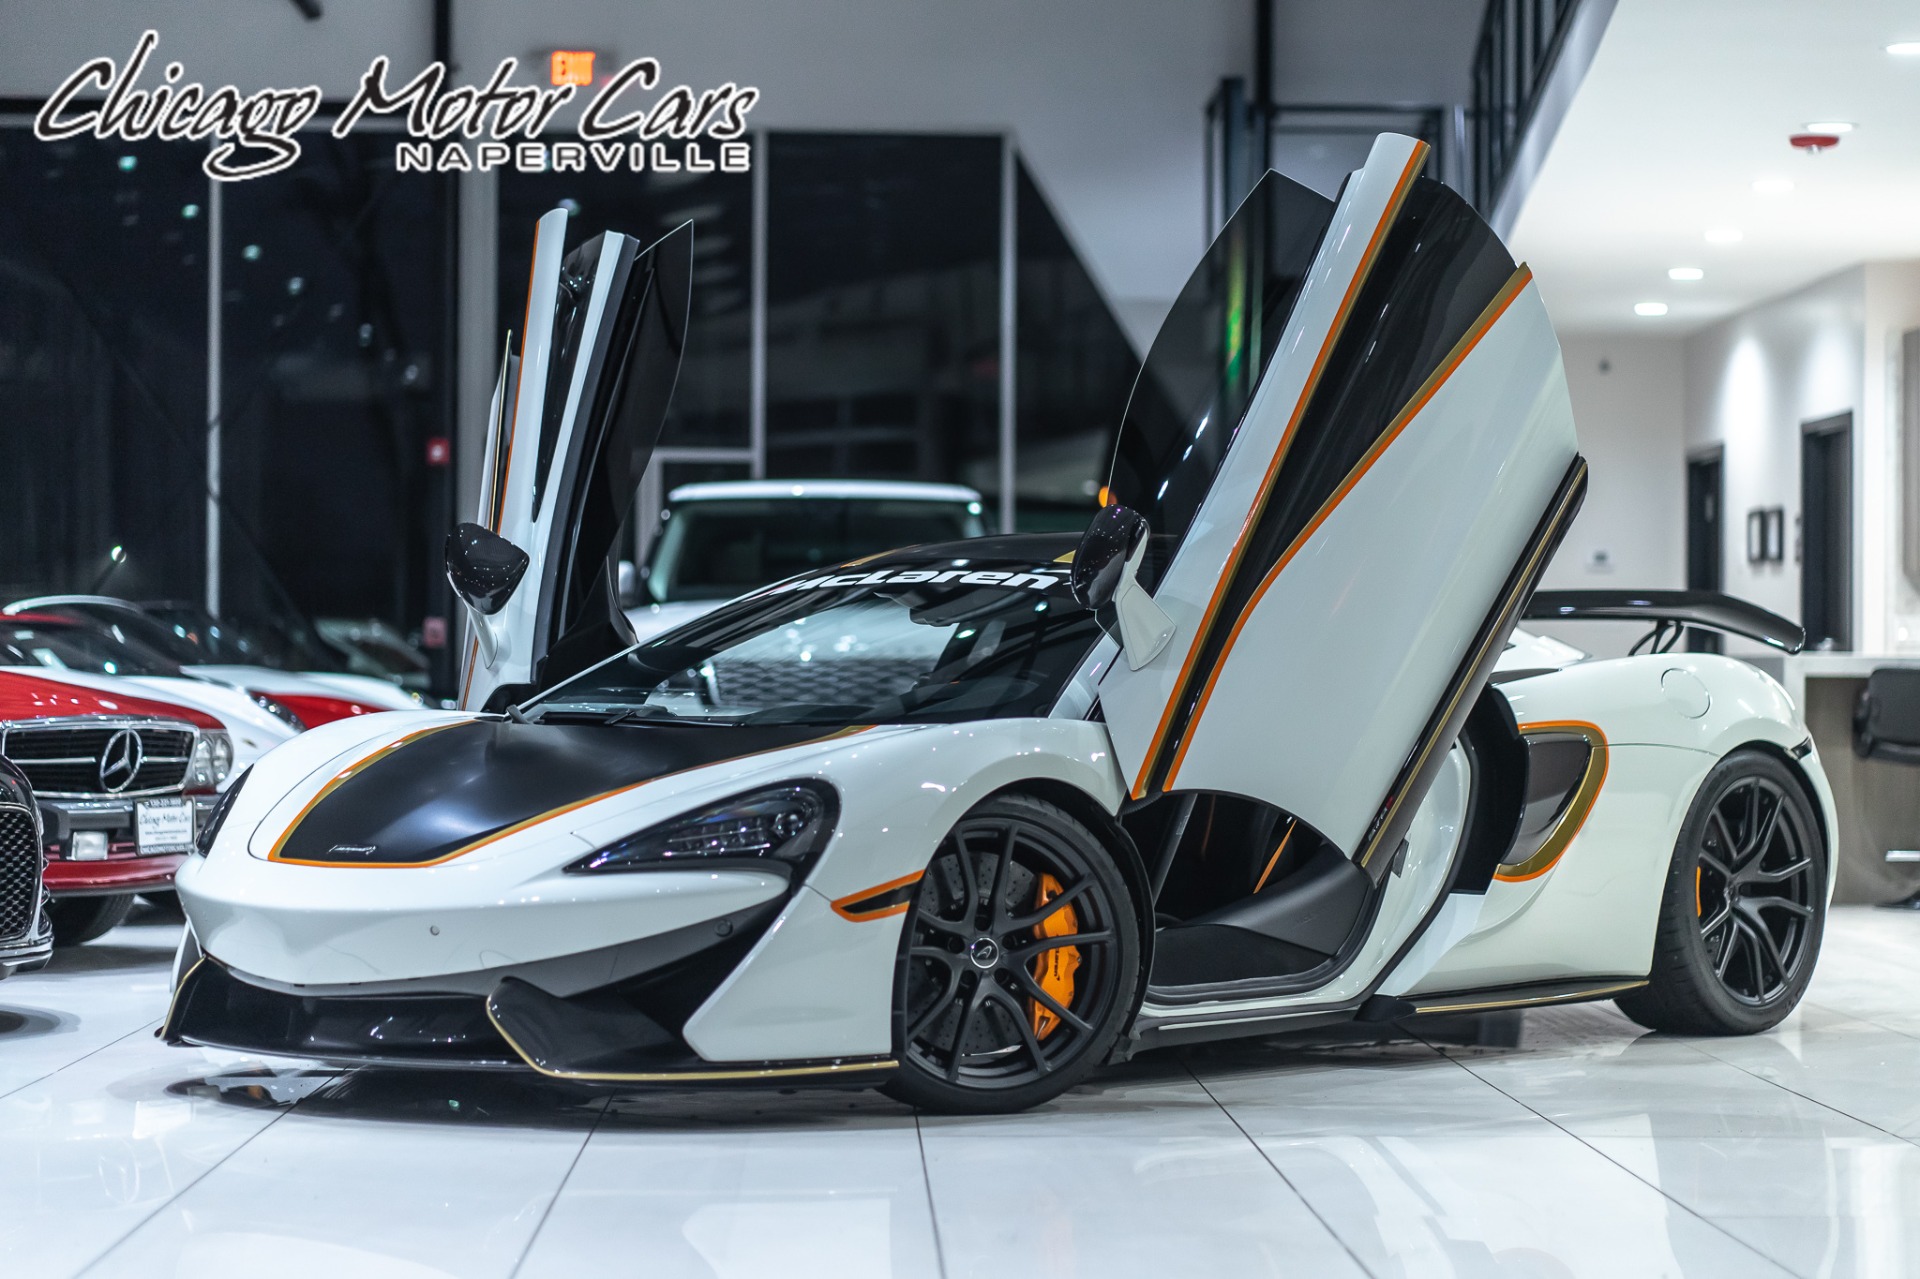 Used-2016-McLaren-570S-Coupe-Carbon-Fiber-DownpipesExhaust-Tune